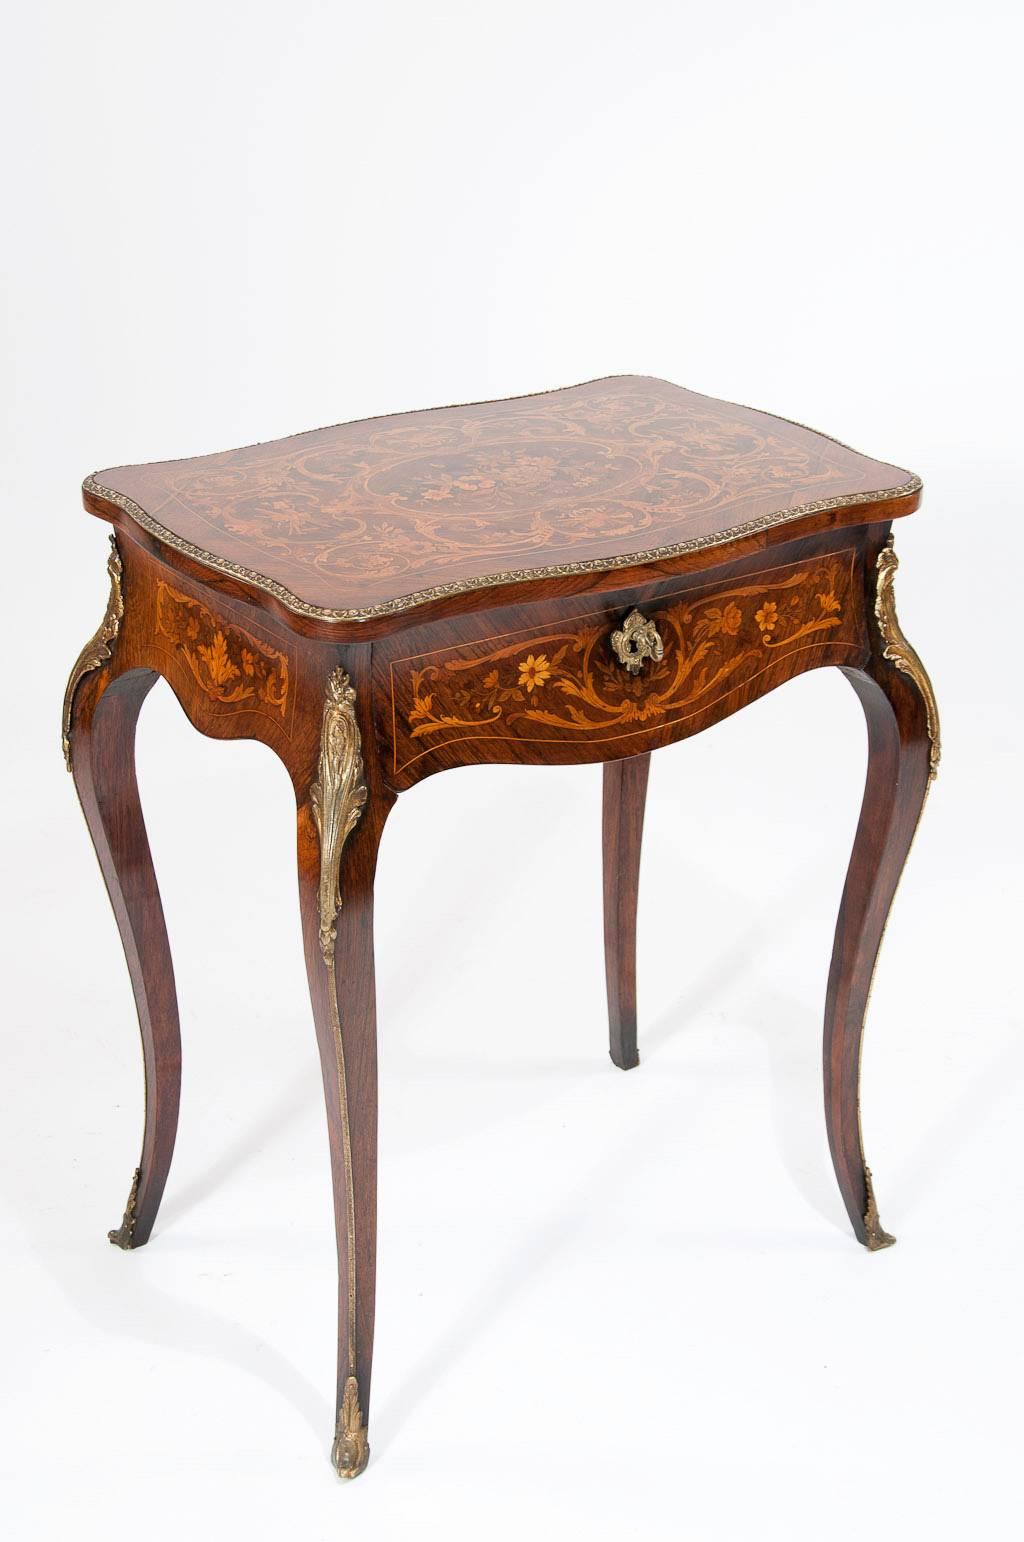 A exceptional quality marquetry inlaid French Louis XV style rosewood gilt metal mounted dressing table or side table with hinged top and pull-out drawer retaining a good color and patina. This lovely French side table / dressing table is of the